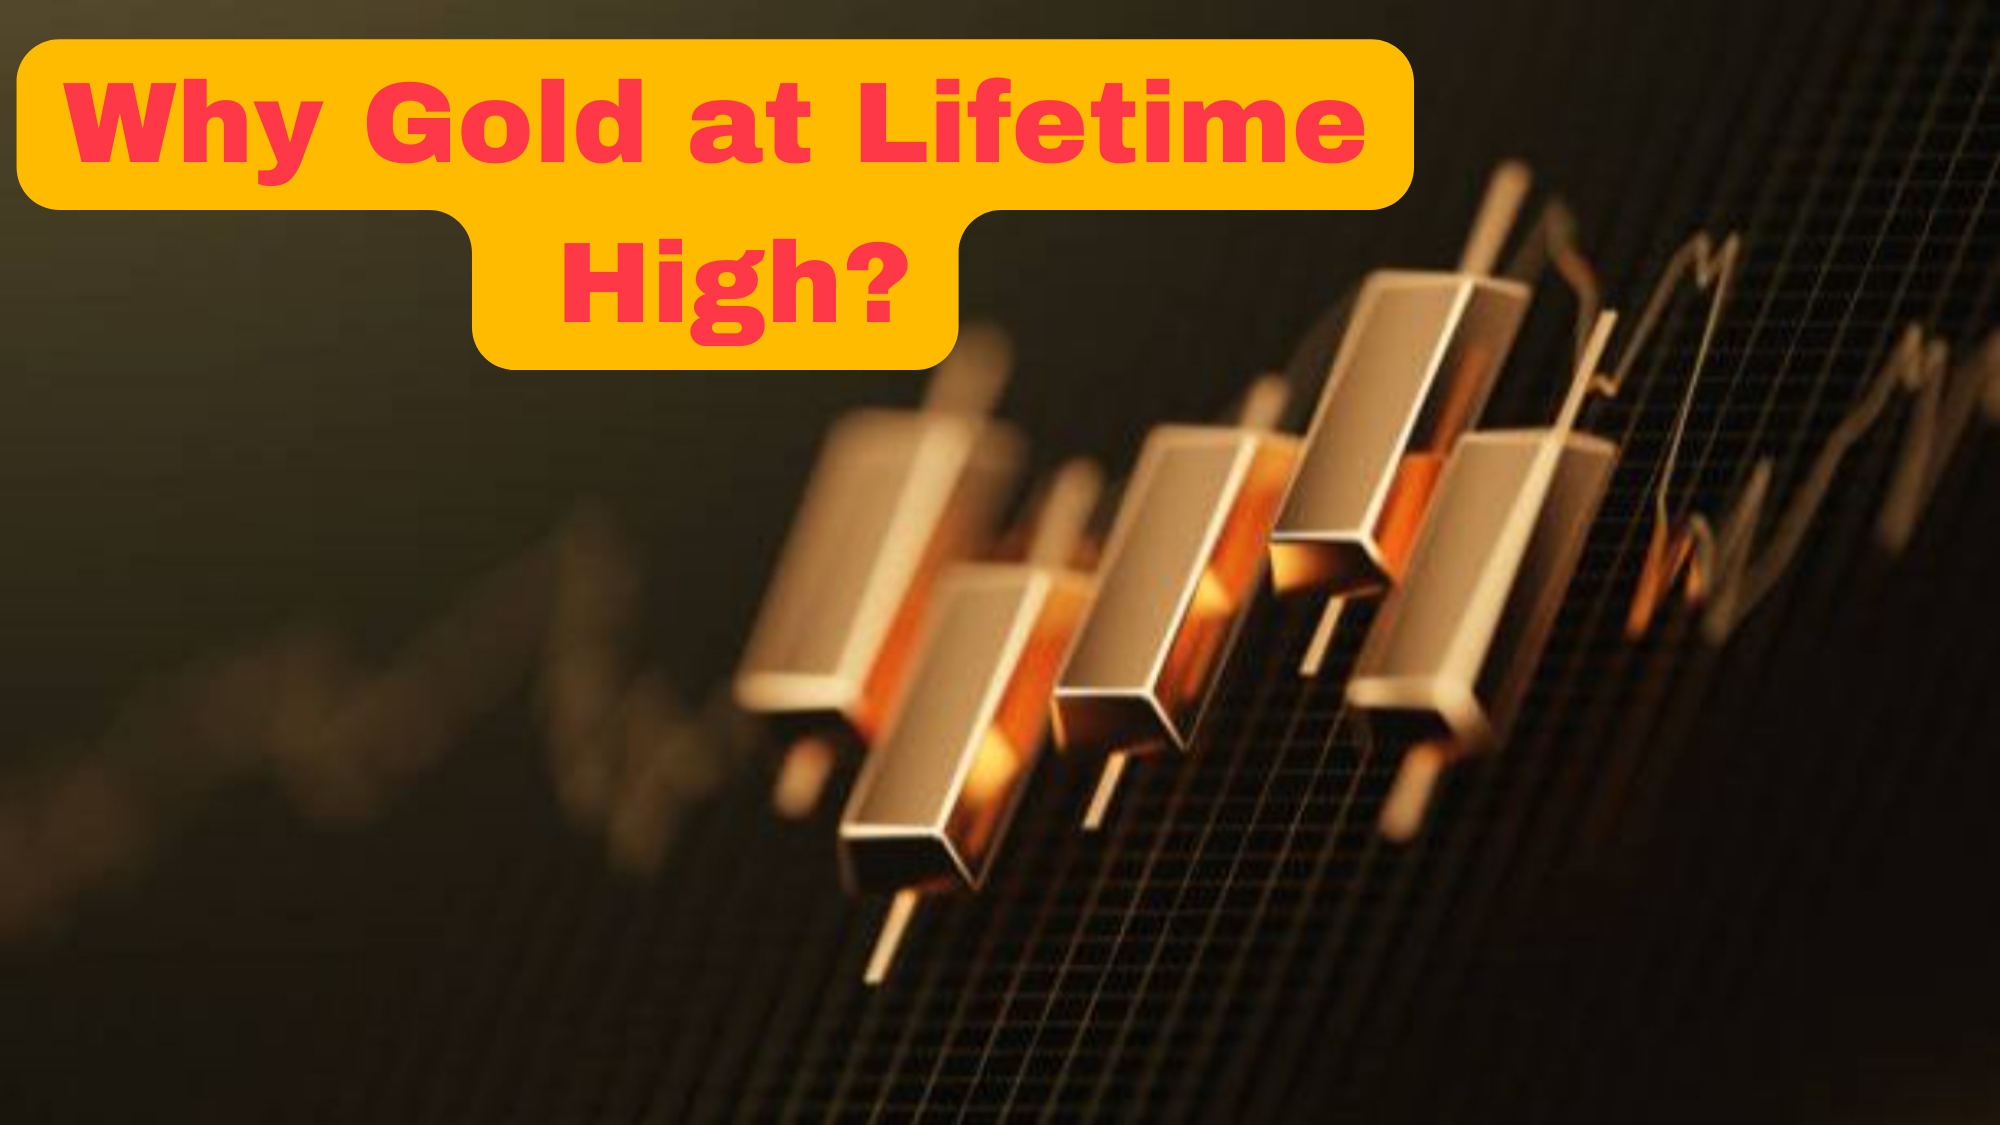 Why Gold at Lifetime High? Let’s Understand